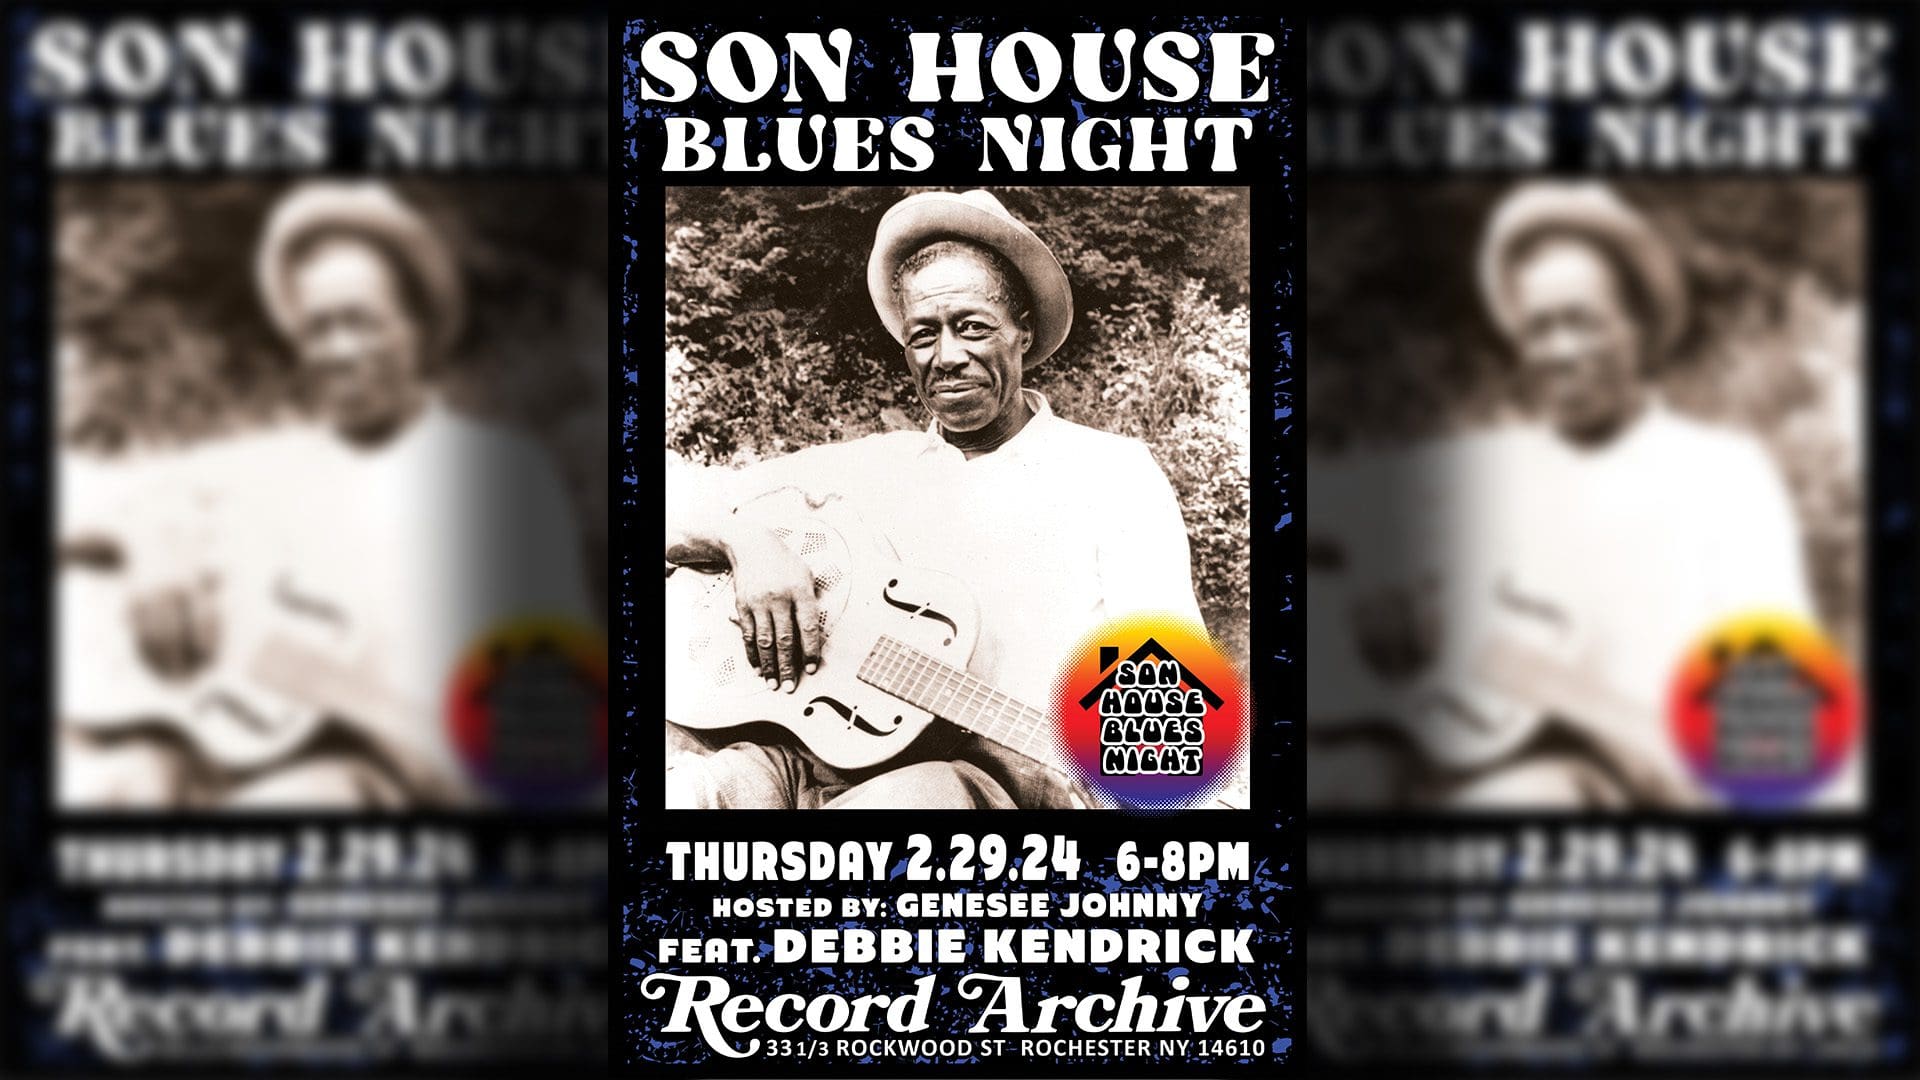 Son House Blues Night.<br />
Thursday 2.29.24. 6-8pm. Genesee Johnny ft. Debbie Kendrick. Record Archive 33 1/3 Rockwood St Rochester NY 14610.<br />
